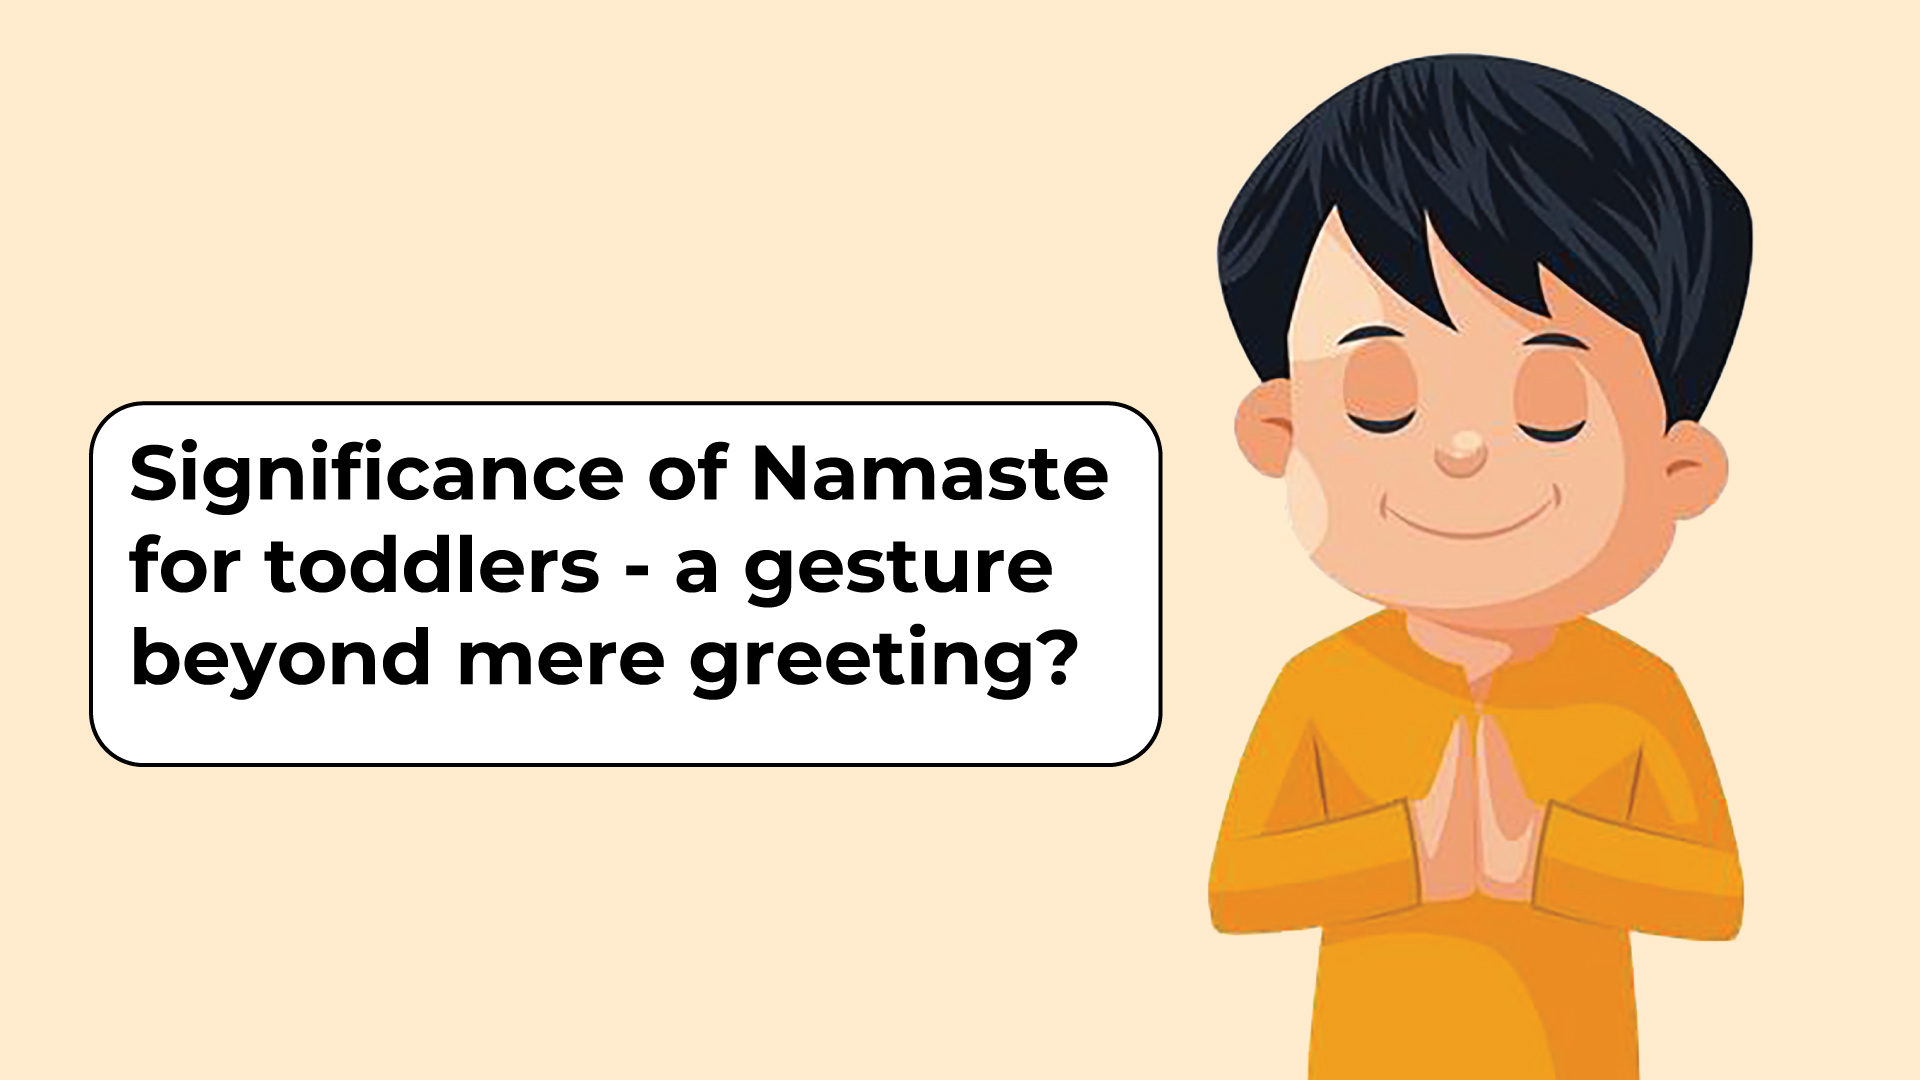 What is the Significance of Namaste